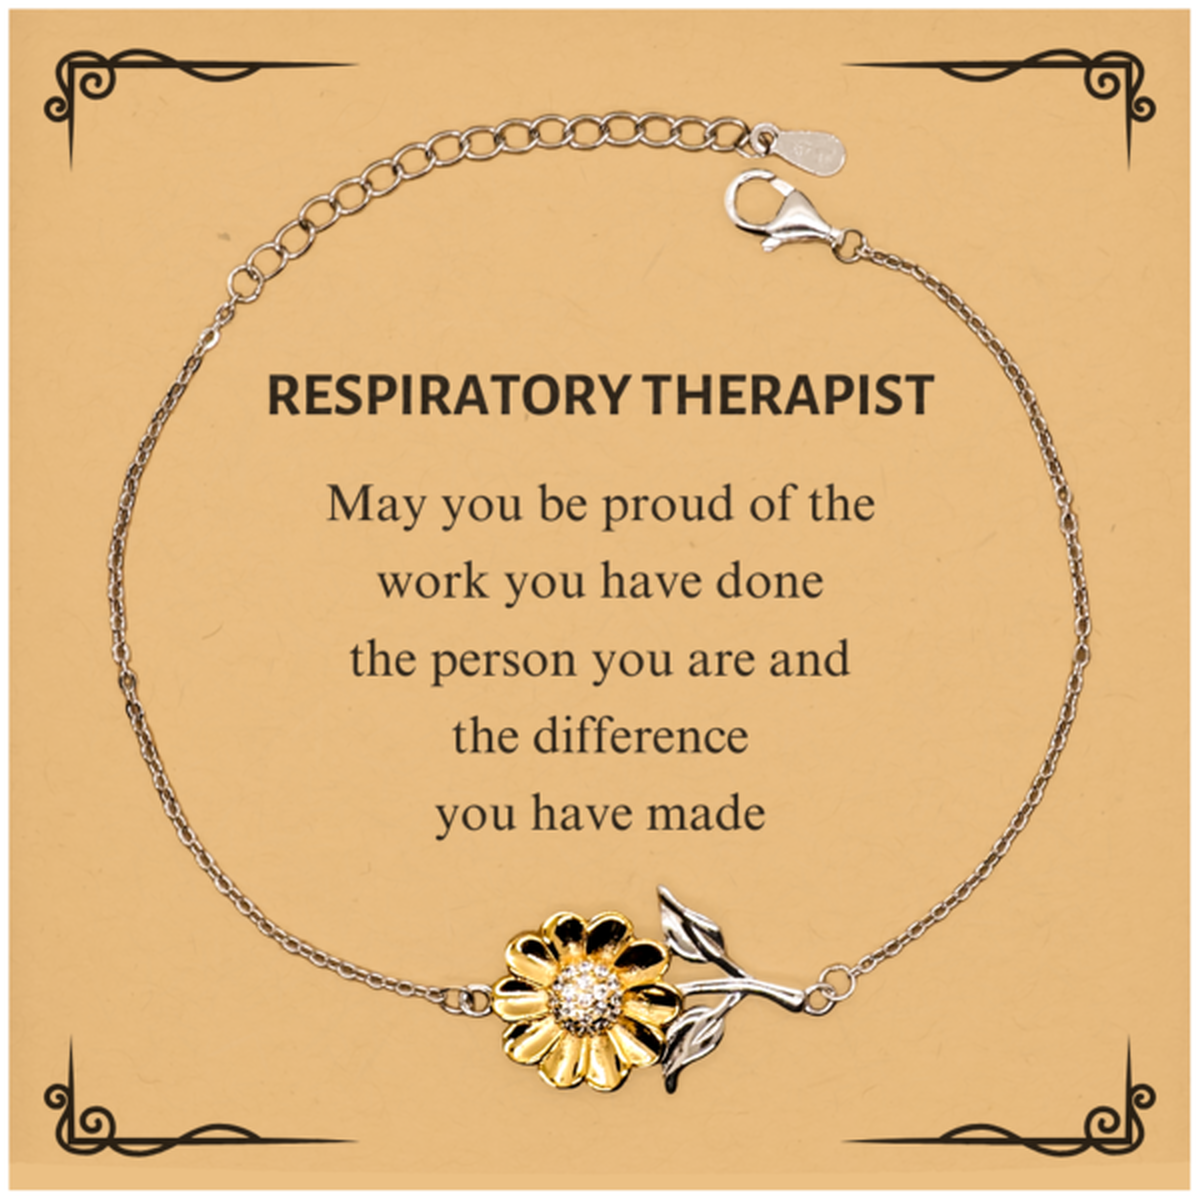 Respiratory Therapist May you be proud of the work you have done, Retirement Respiratory Therapist Sunflower Bracelet for Colleague Appreciation Gifts Amazing for Respiratory Therapist